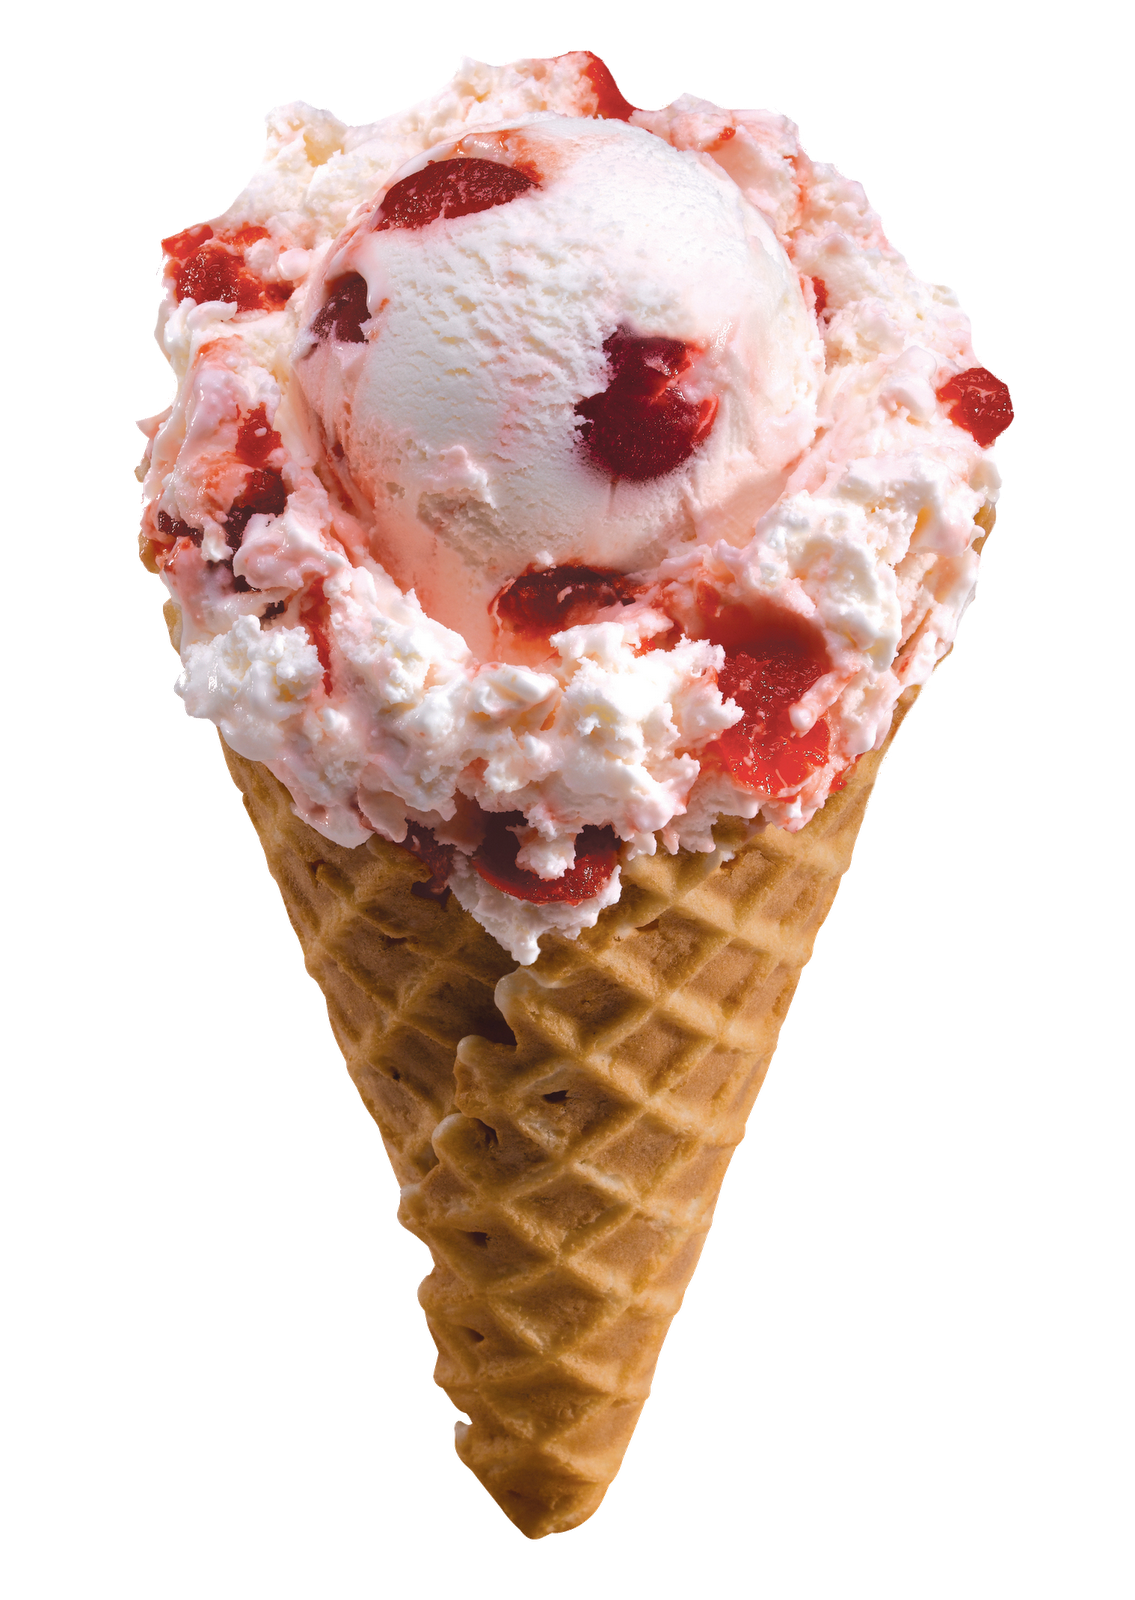 Ice Cream Free Download PNG -